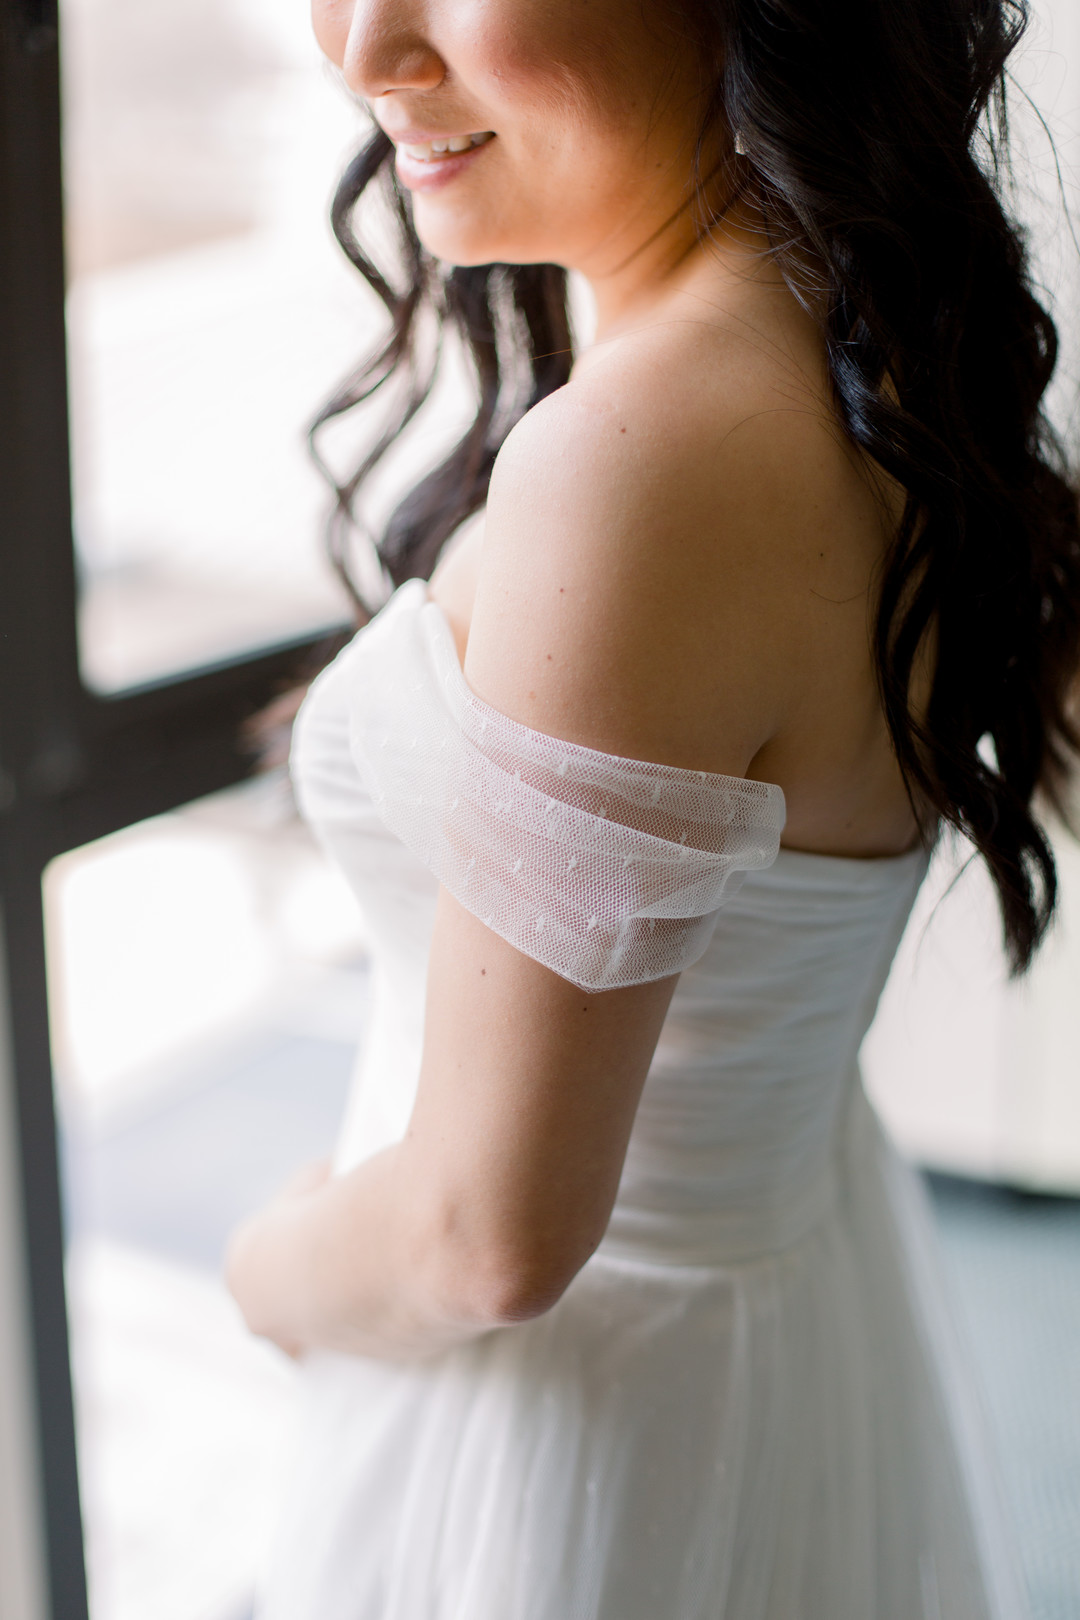 DIY wedding dress sleeves: Spring wedding inspiration captured by Nicole Morisco Photography. Find more spring wedding ideas at CHItheeWED.com!